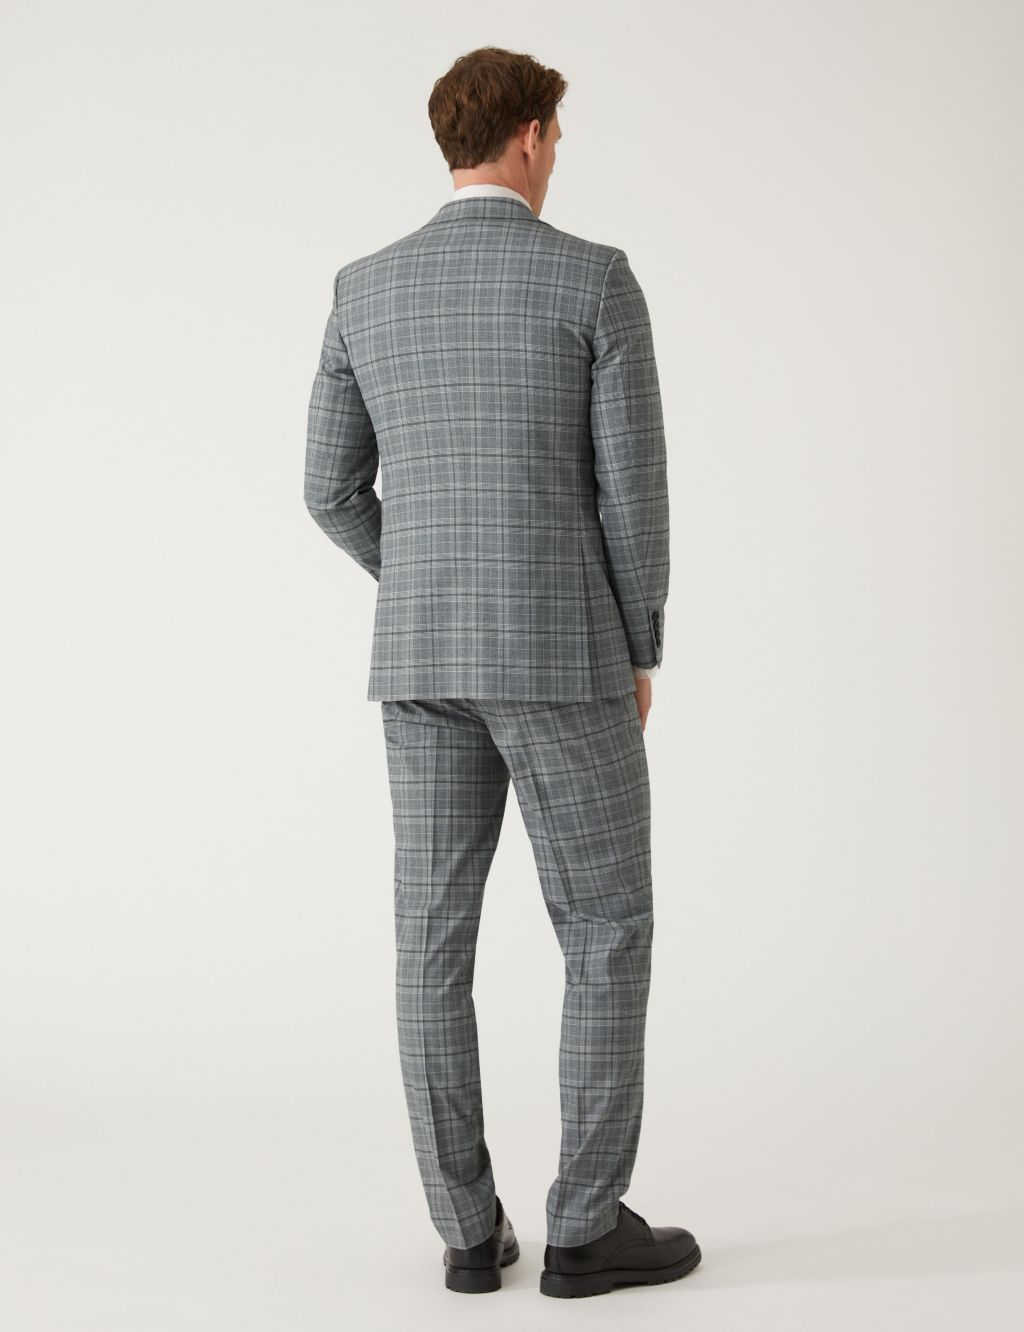 Slim Fit Prince of Wales Check Suit image 3